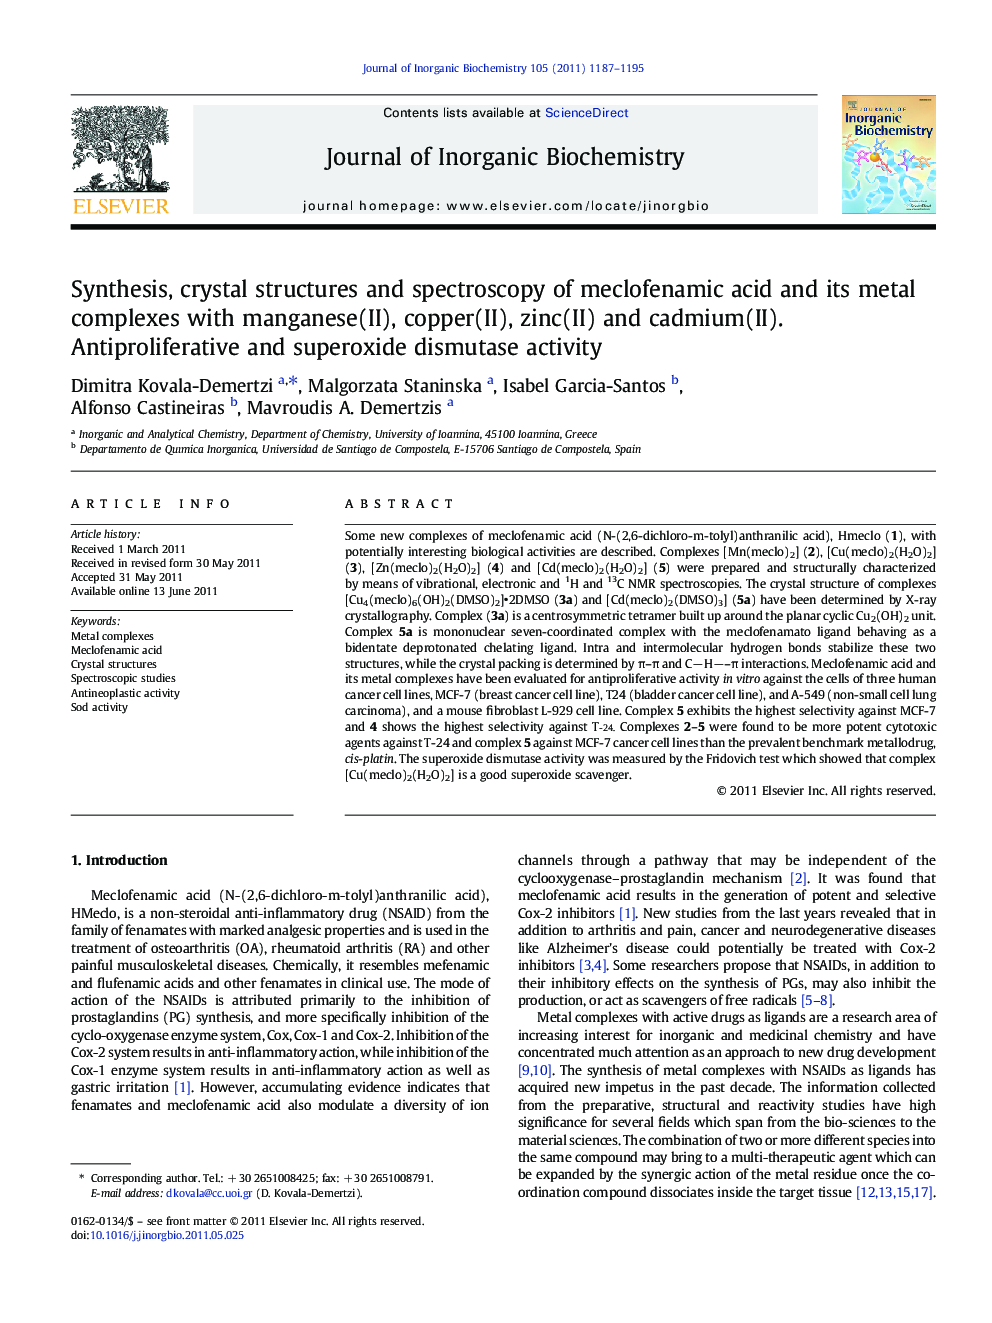 Synthesis, crystal structures and spectroscopy of meclofenamic acid and its metal complexes with manganese(II), copper(II), zinc(II) and cadmium(II). Antiproliferative and superoxide dismutase activity